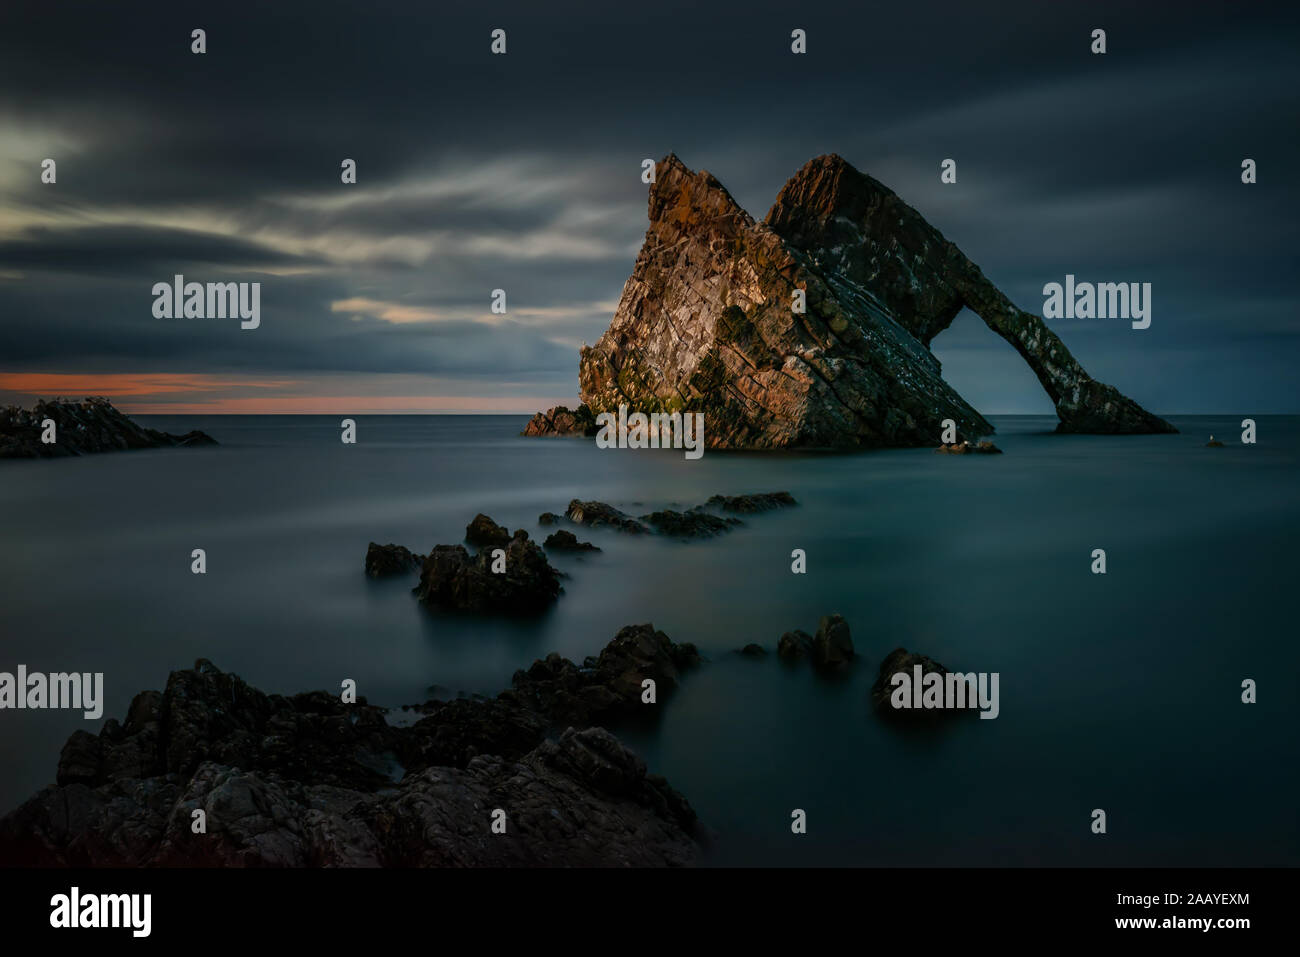 Bow Fiddle Rock formations in dusk, Portknockie, Scotland Stock Photo